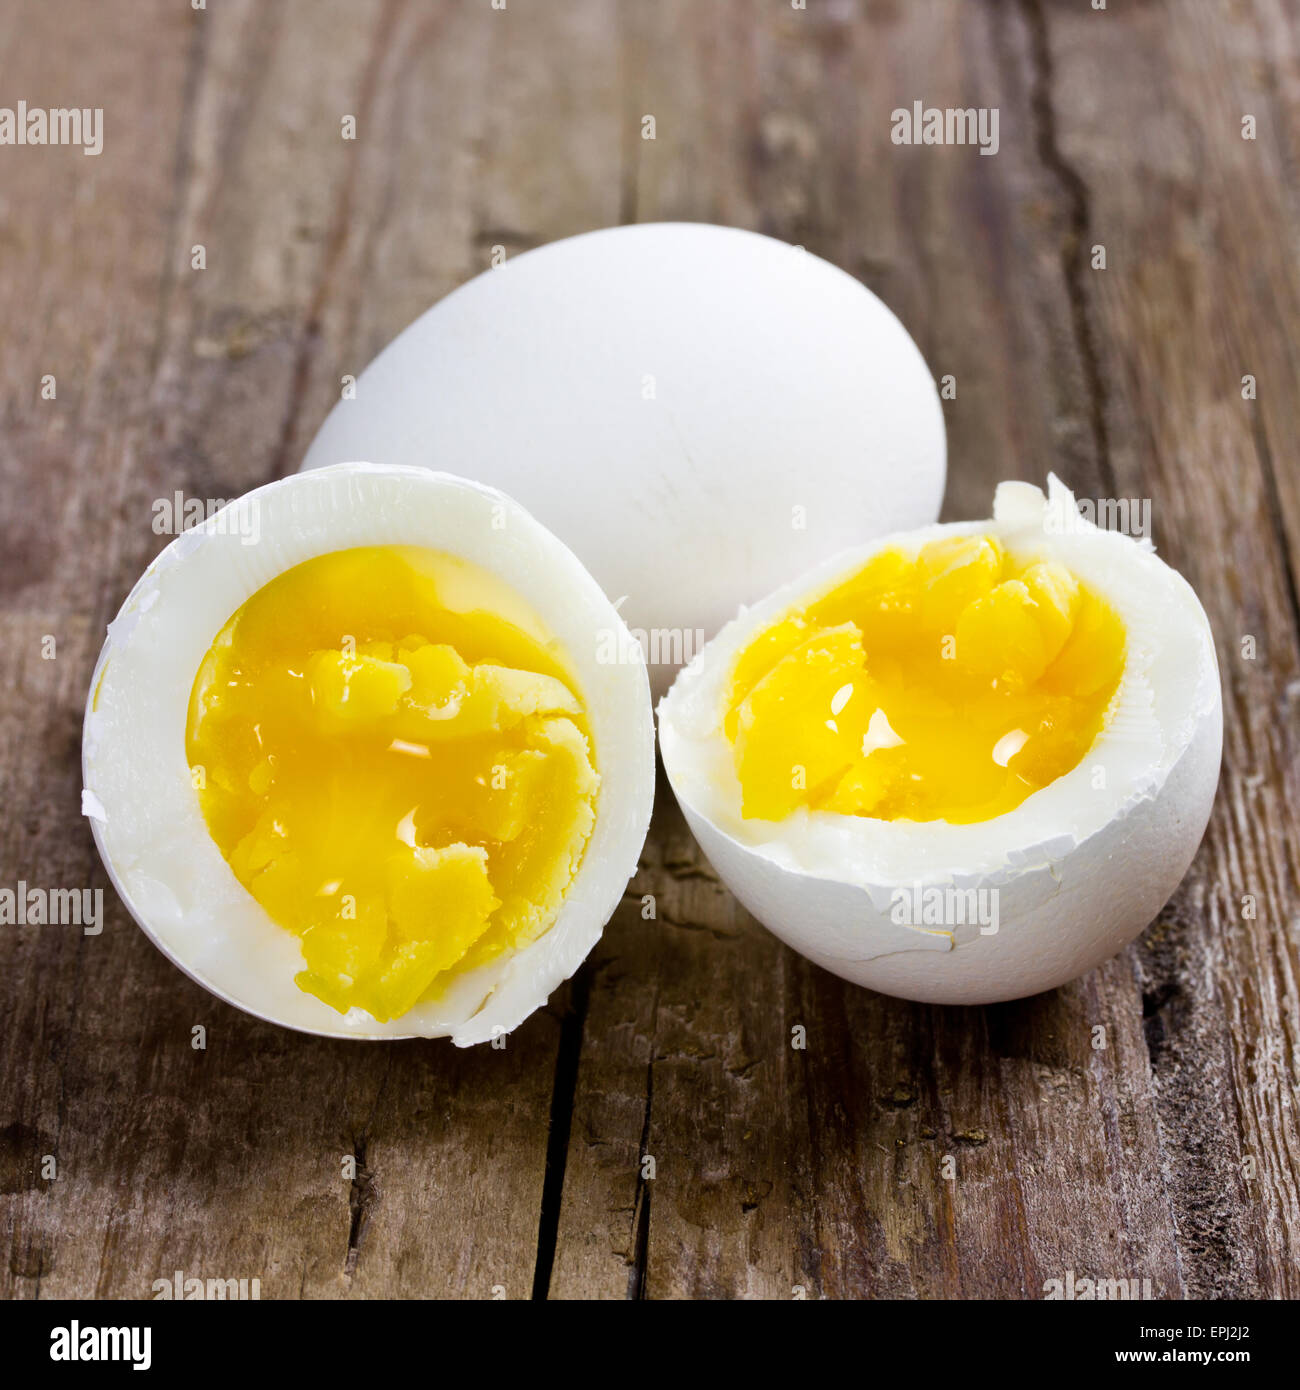 eggs on wooden table Stock Photo